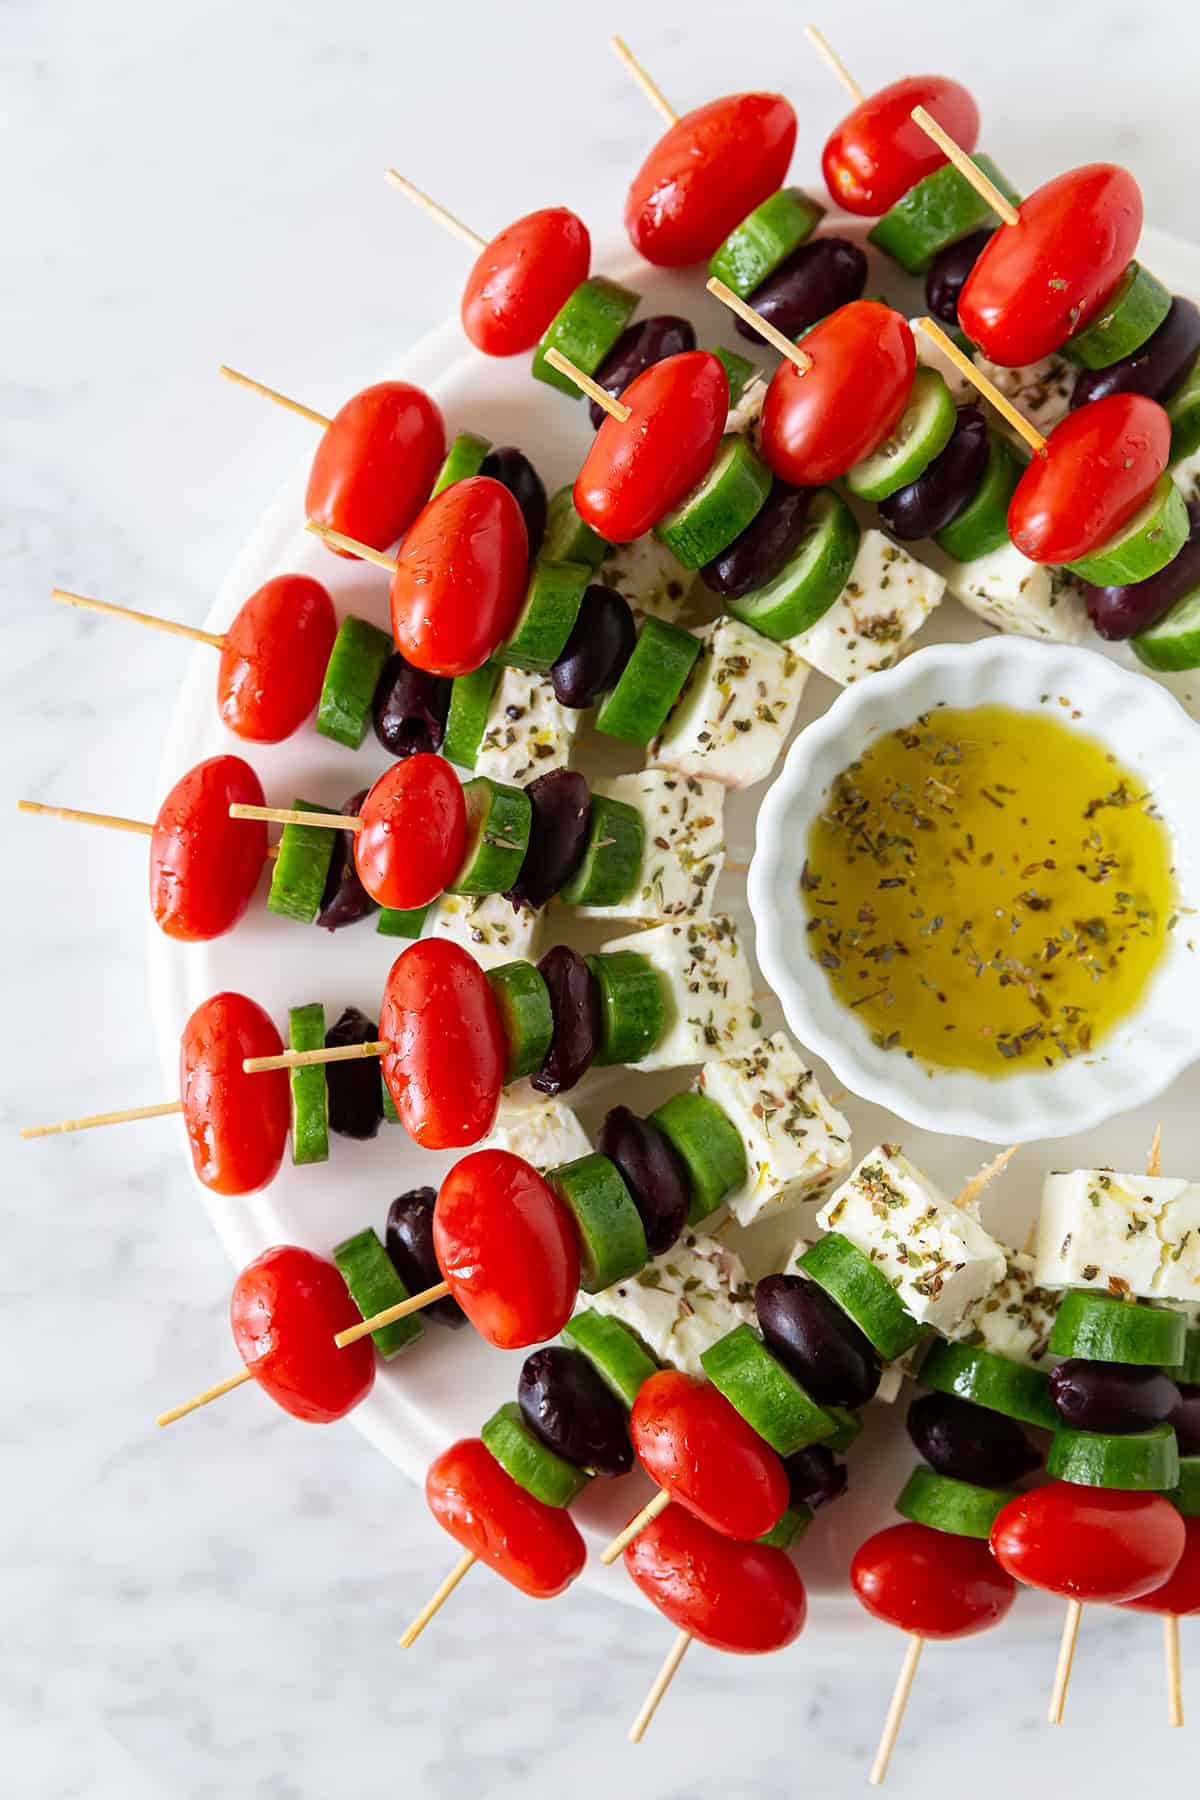 Tomatoes, cucumbers, olives, and feta cheese on a tray with a dipping sauce.